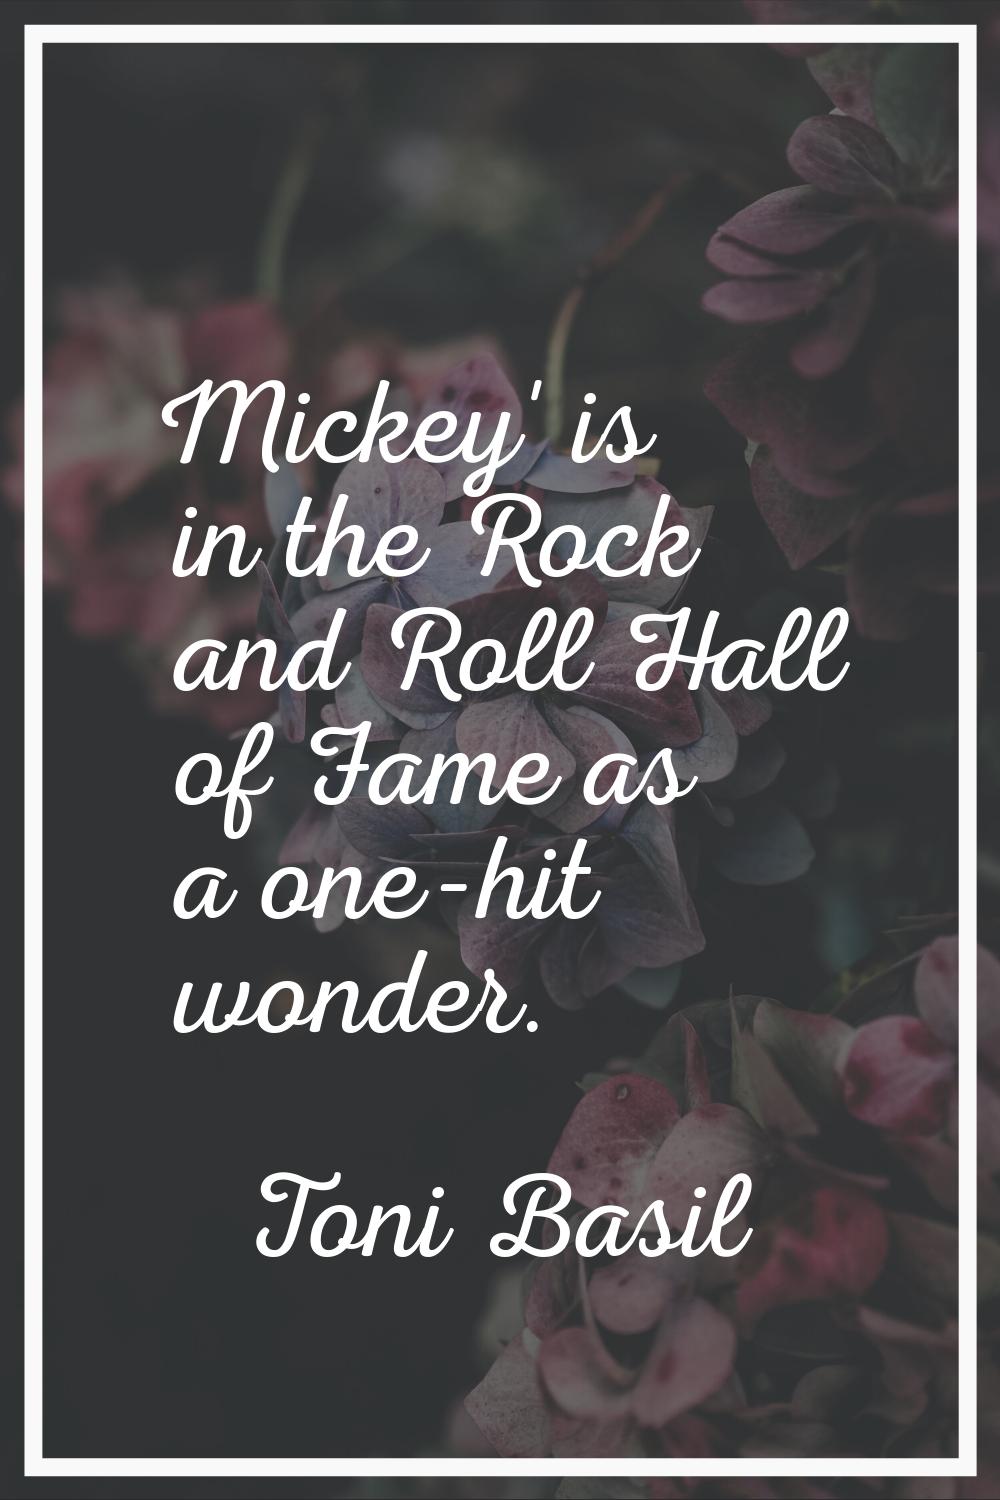 Mickey' is in the Rock and Roll Hall of Fame as a one-hit wonder.